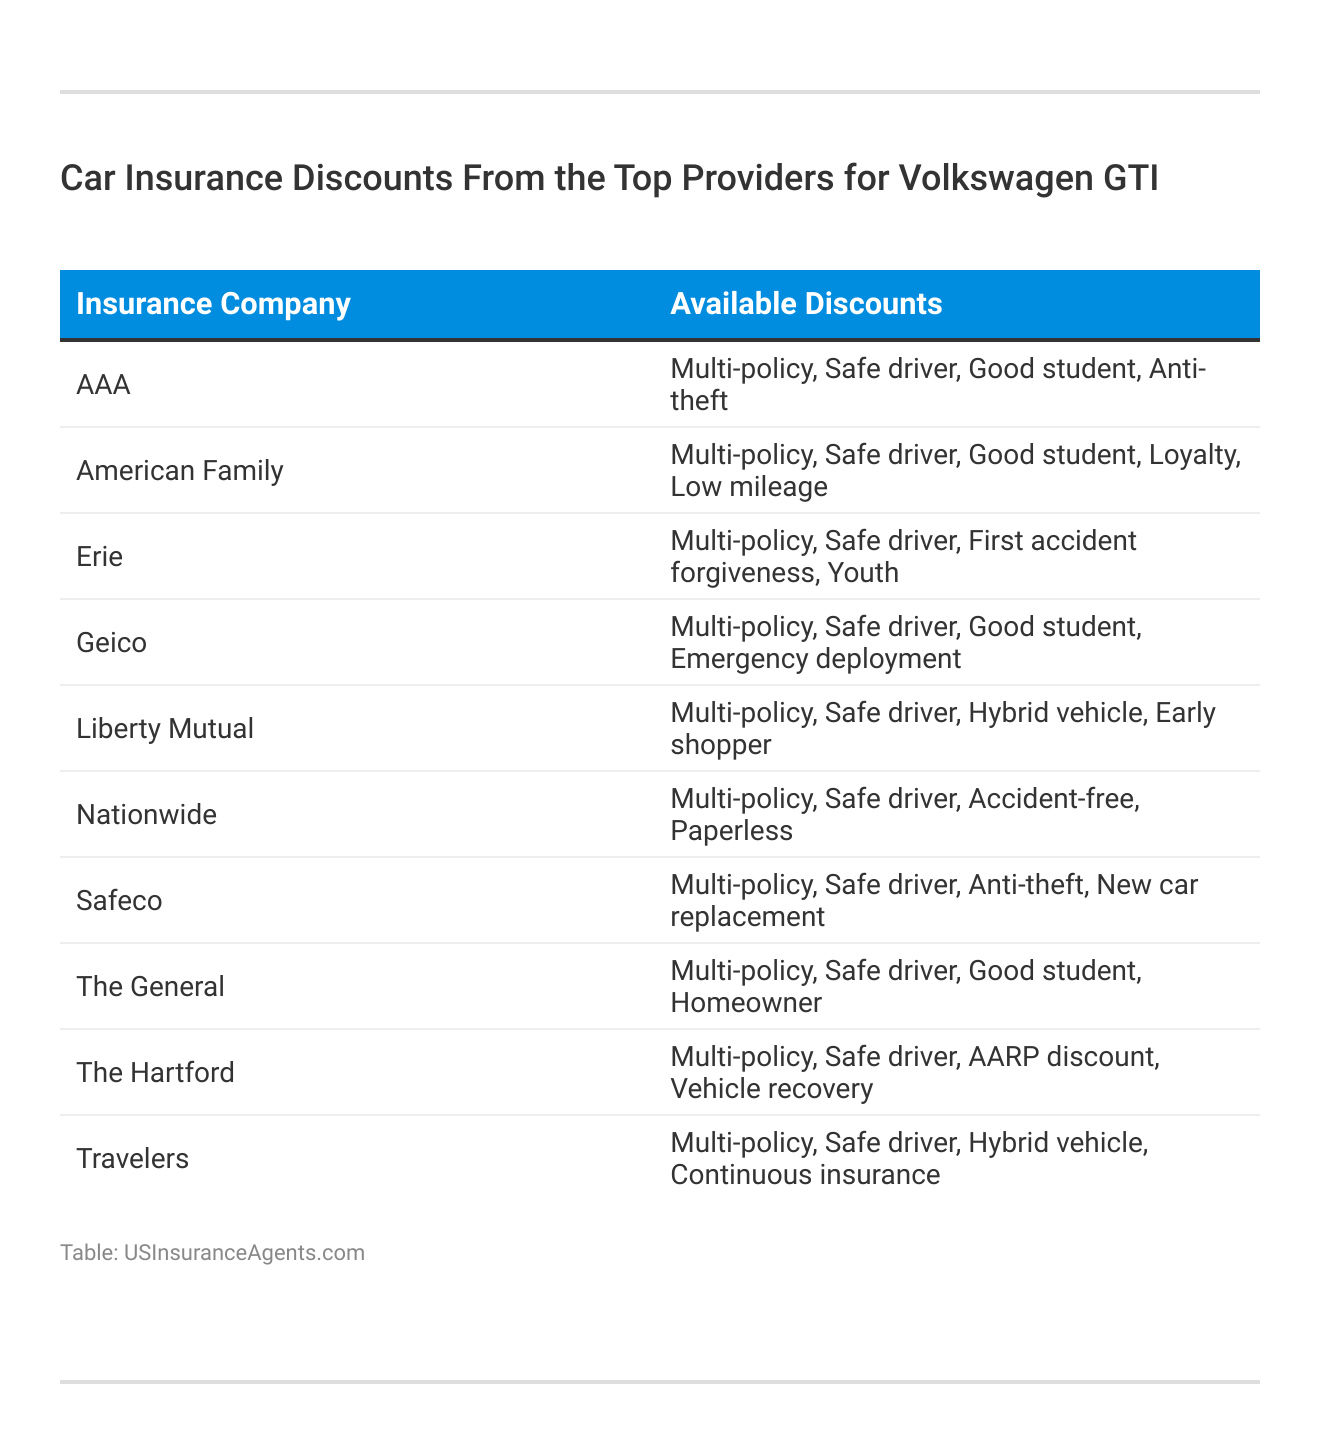 <h3>Car Insurance Discounts From the Top Providers for Volkswagen GTI</h3>